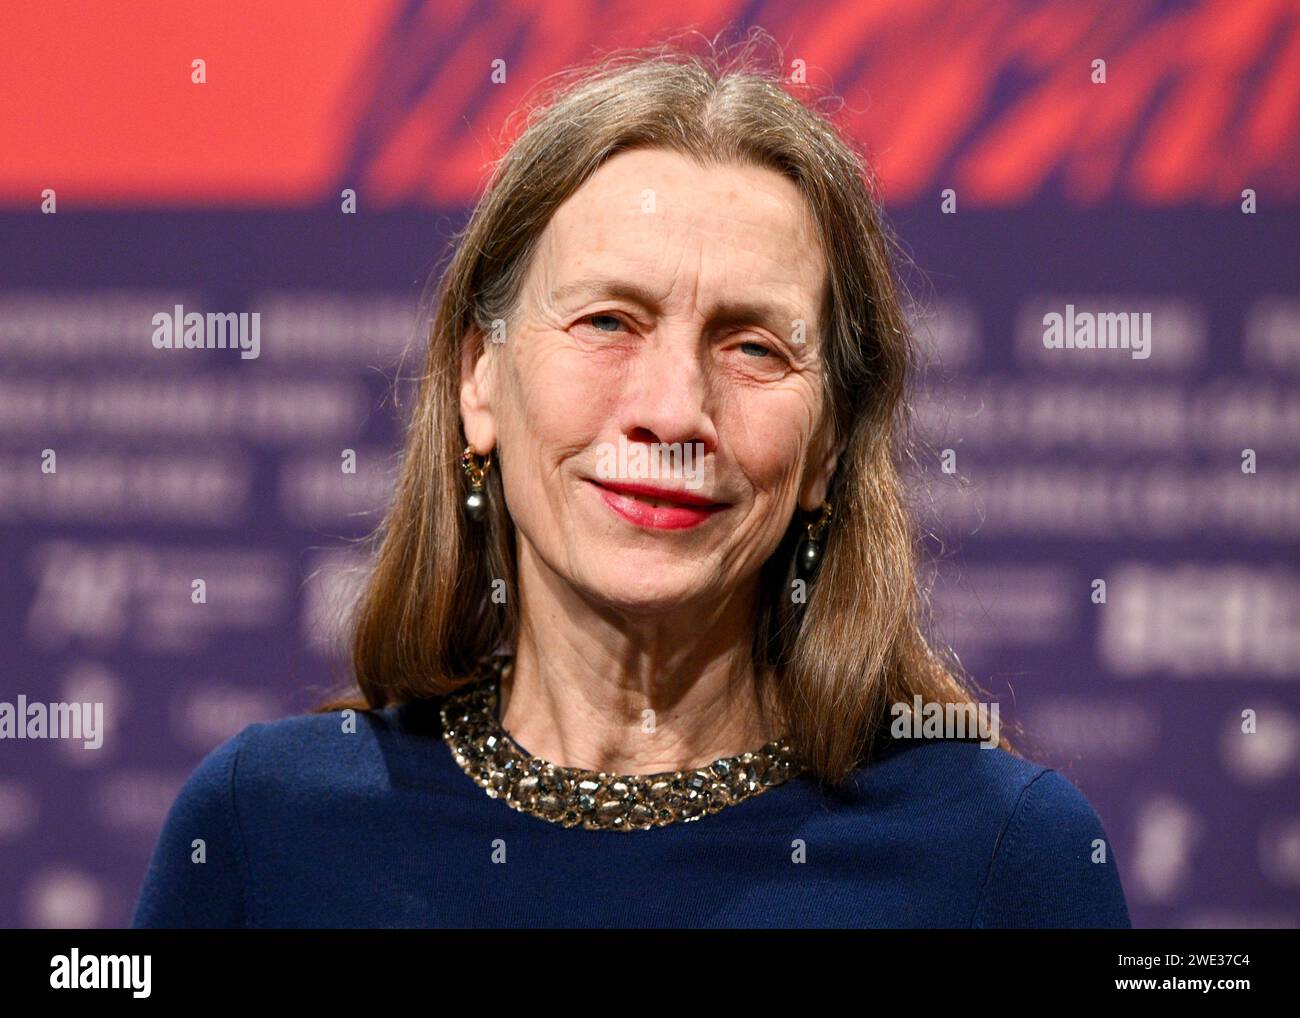 Berlin, Germany. 22nd Jan, 2024. Mariette Rissenbeek, Managing Director of the Berlinale, stands on stage before the start of the press conference announcing the 2024 Berlinale program. Credit: Jens Kalaene/dpa/Alamy Live News Stock Photo